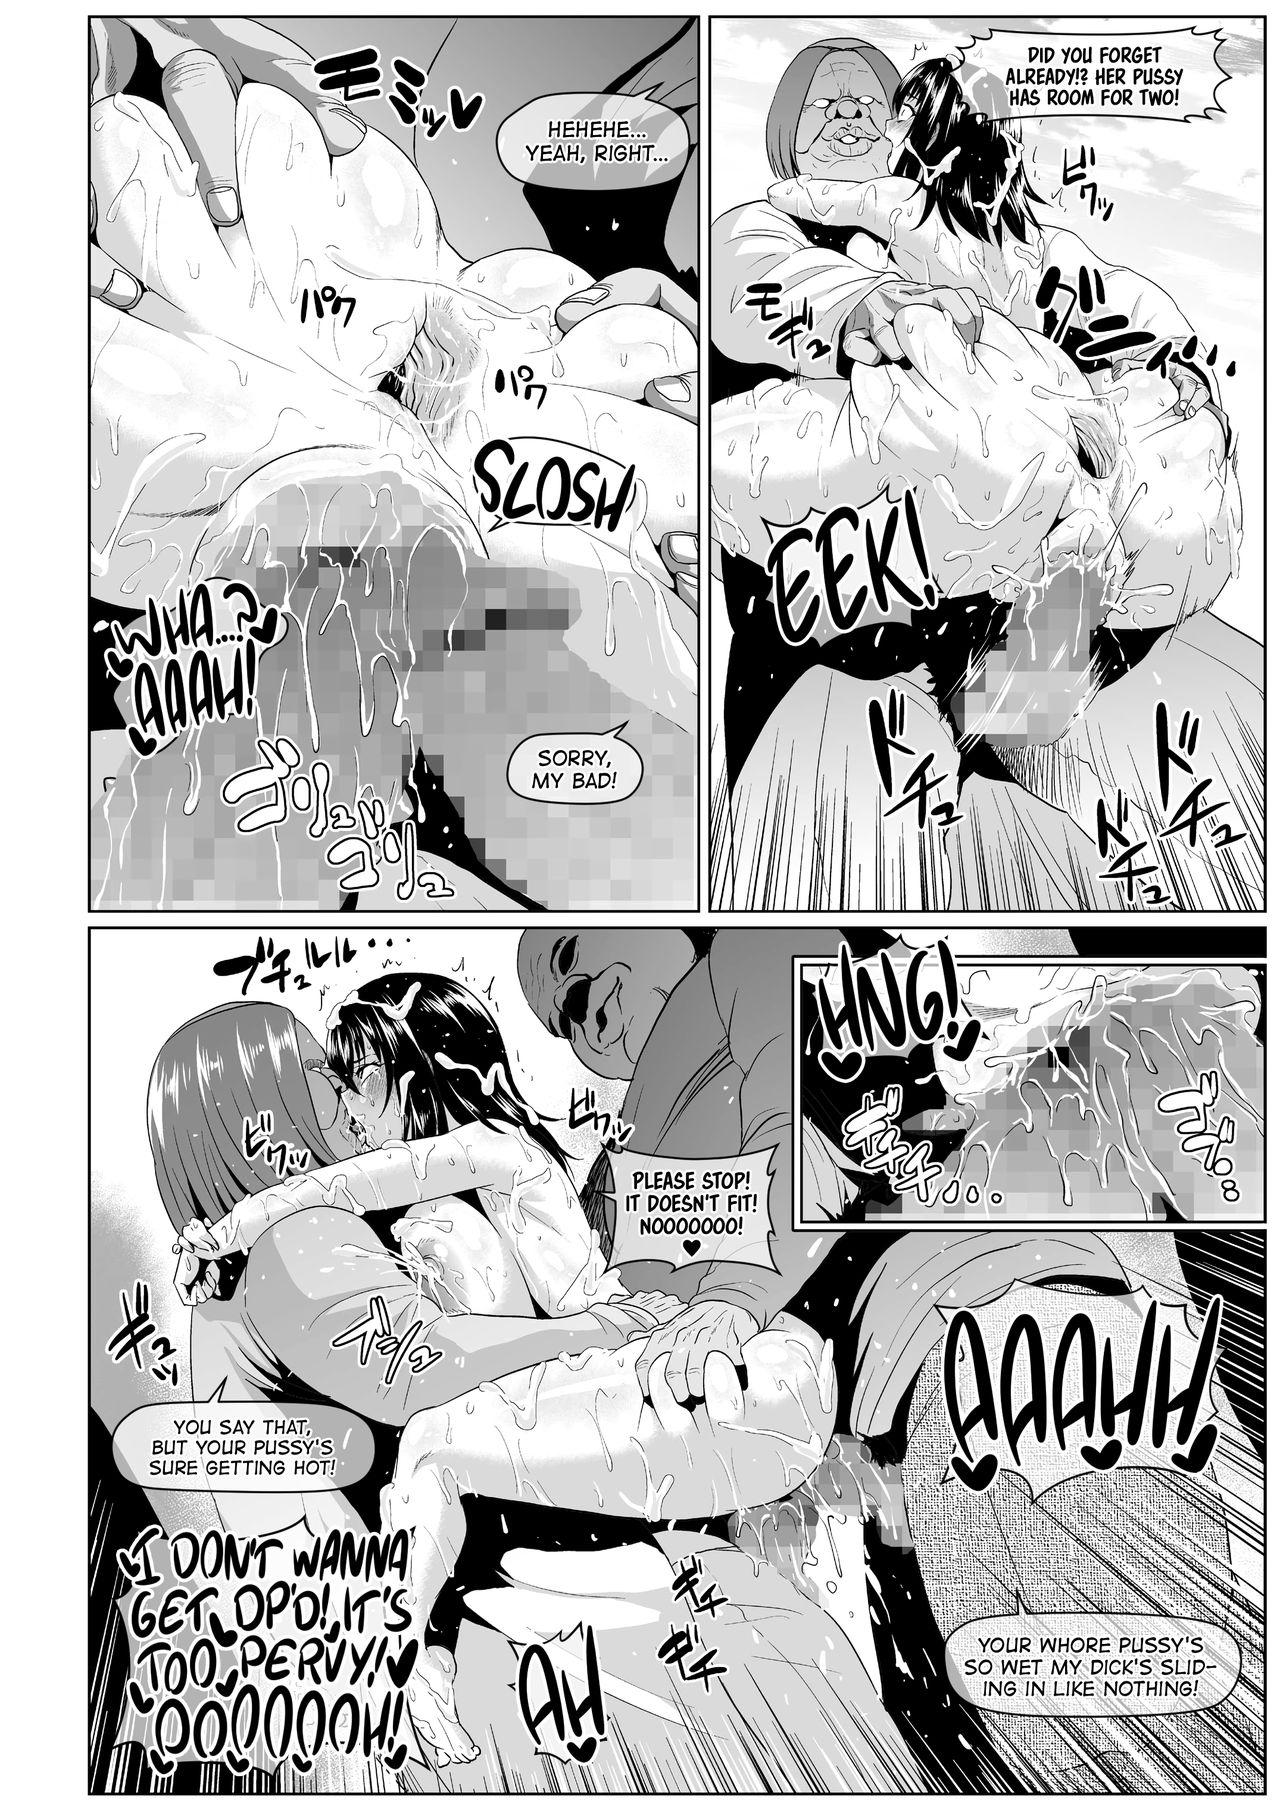 Bus Slave the Blood II - Strike the blood Hardcore Rough Sex - Page 7